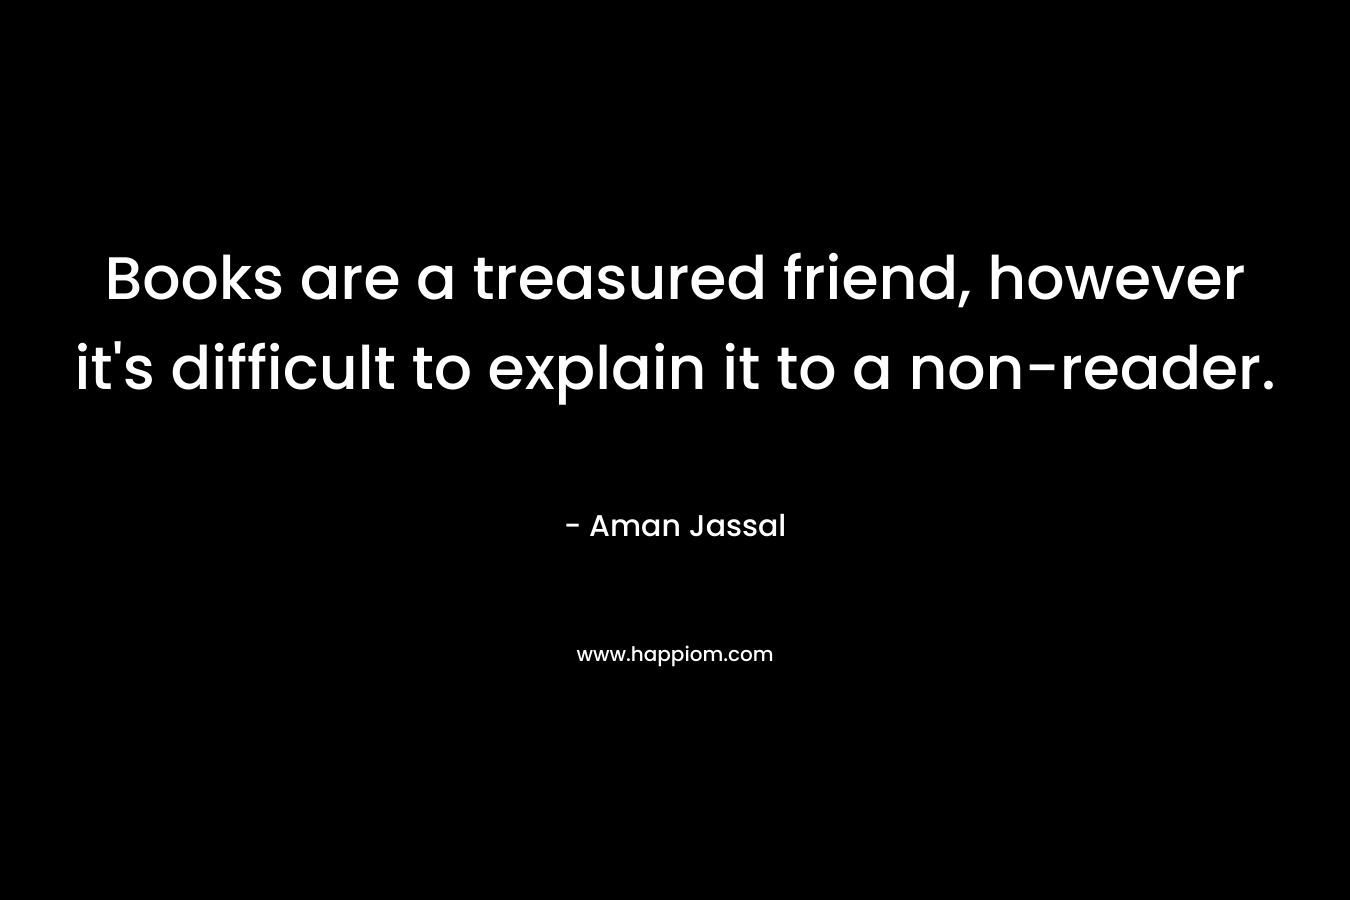 Books are a treasured friend, however it’s difficult to explain it to a non-reader. – Aman Jassal